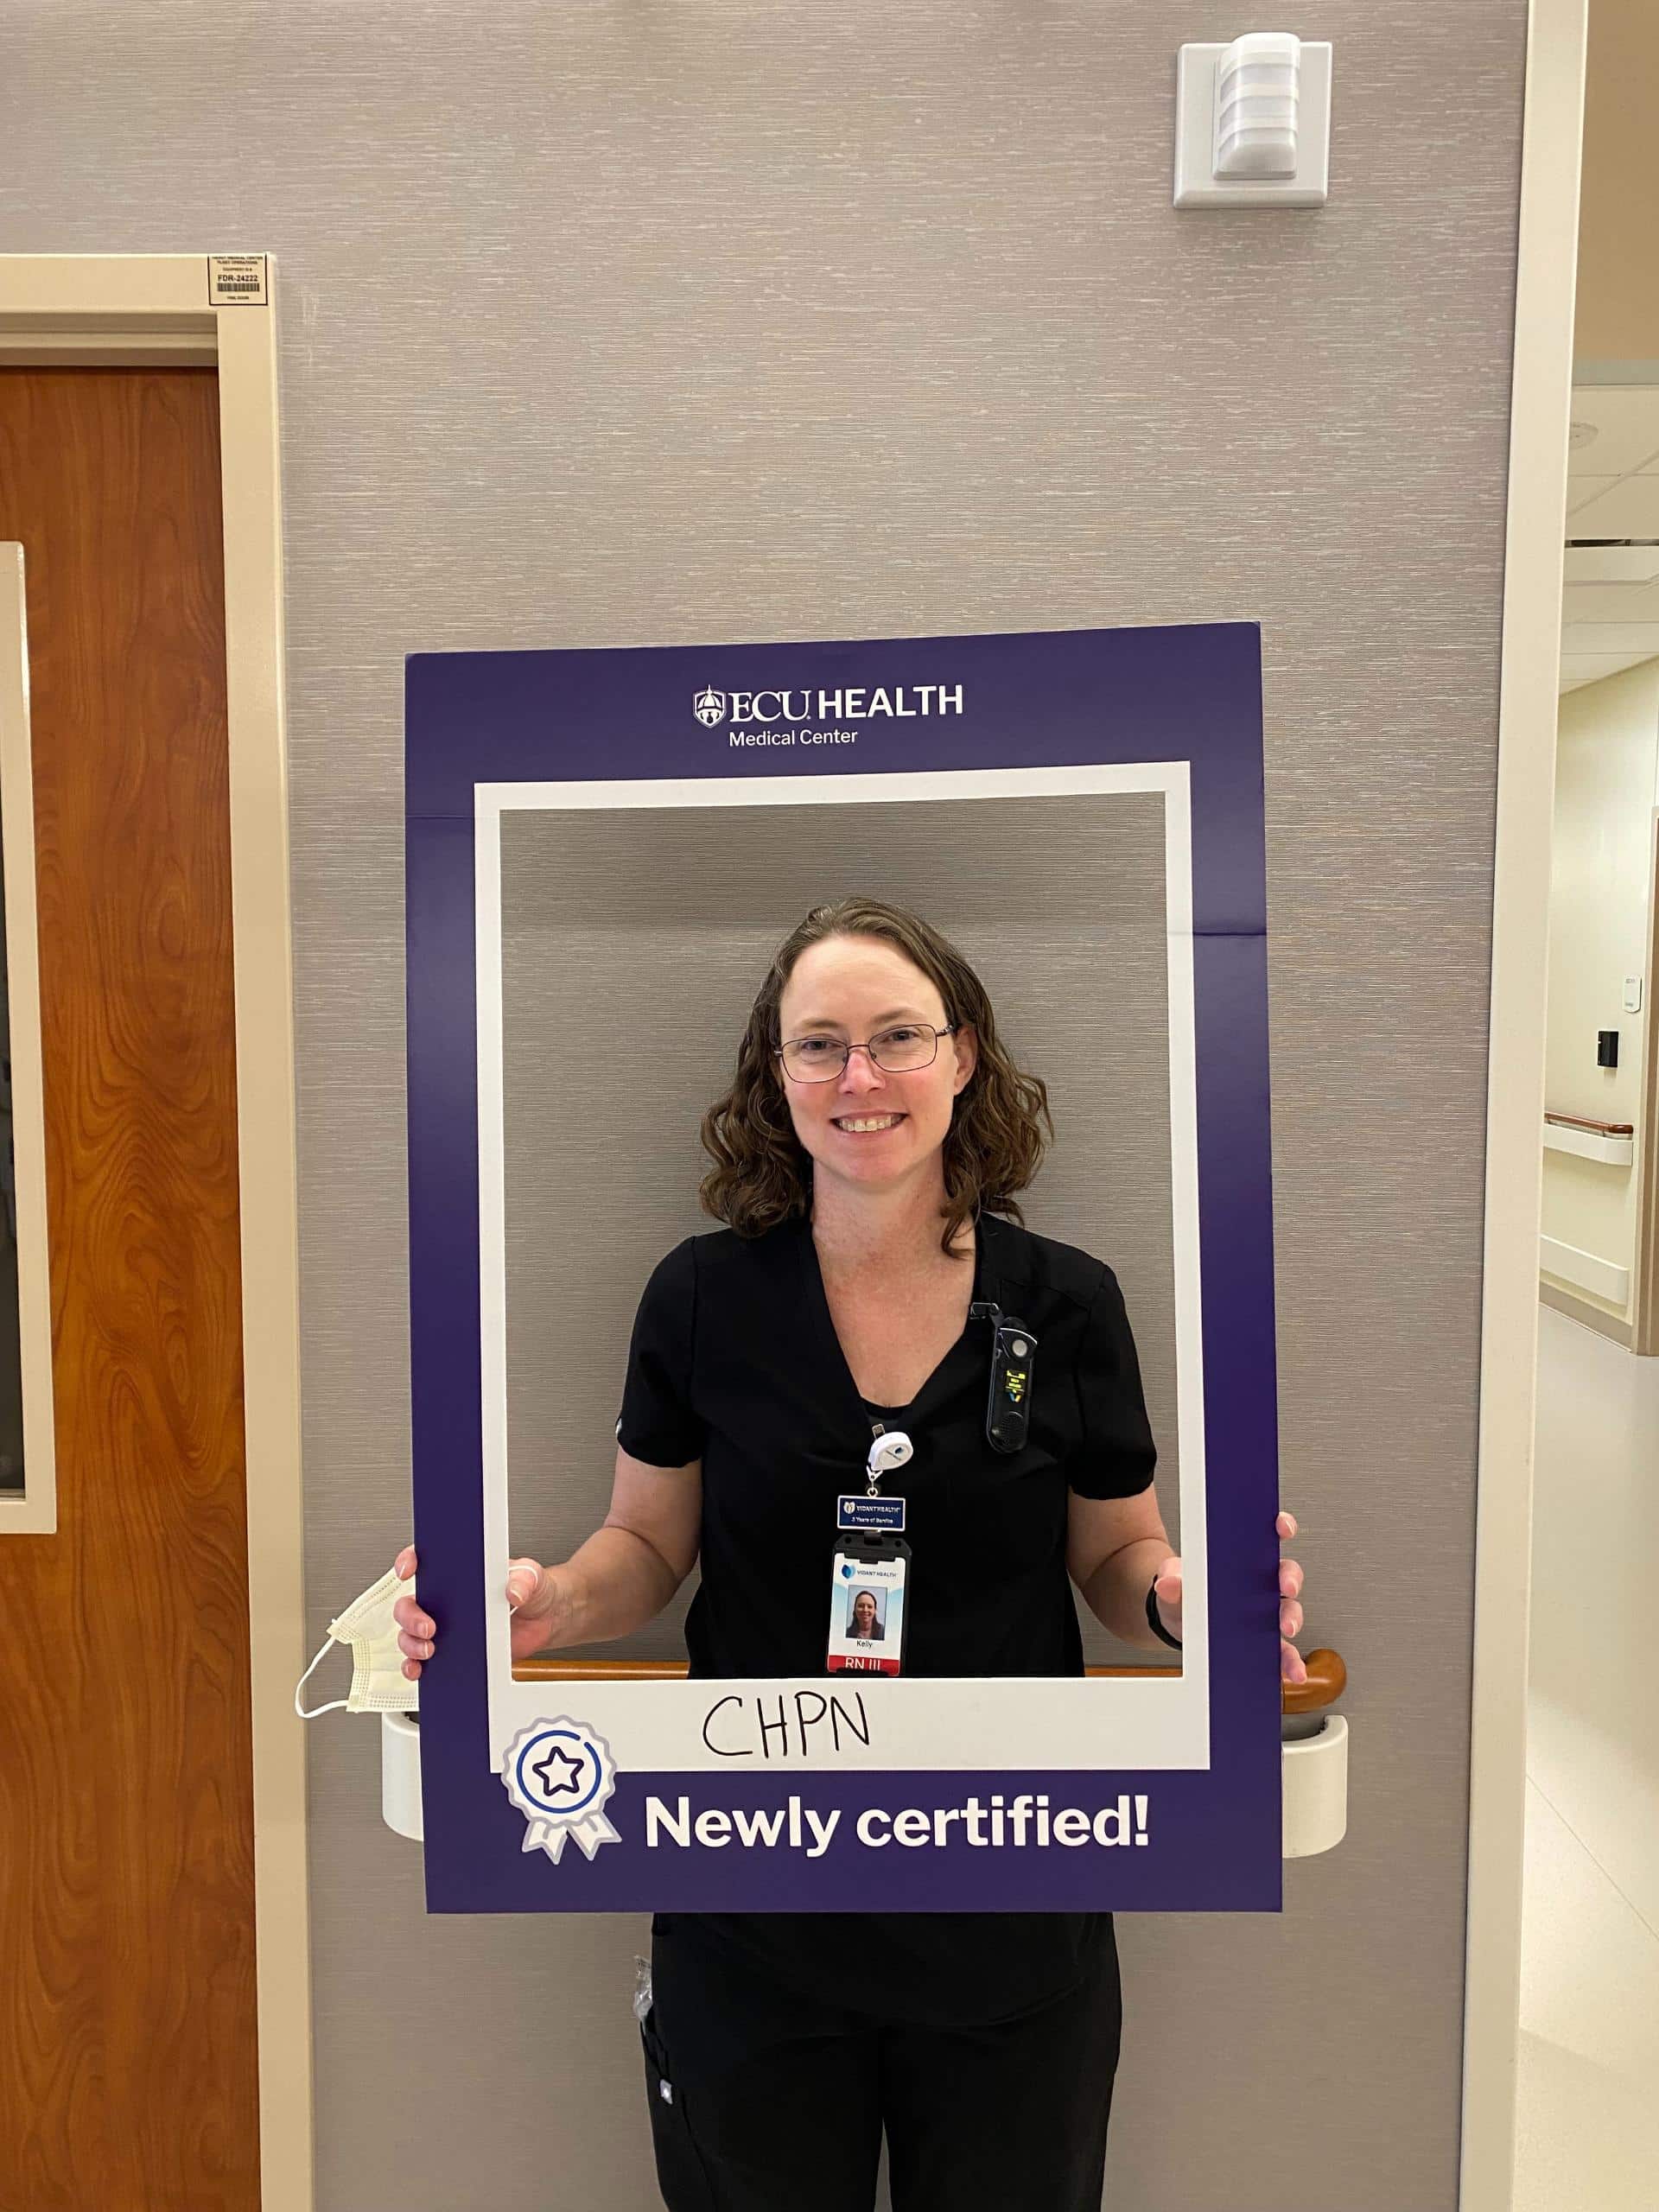 Kelly Outland works on Palliative Care, and she received her CHPN , Certified Hospice & Palliative Care Registered Nurse